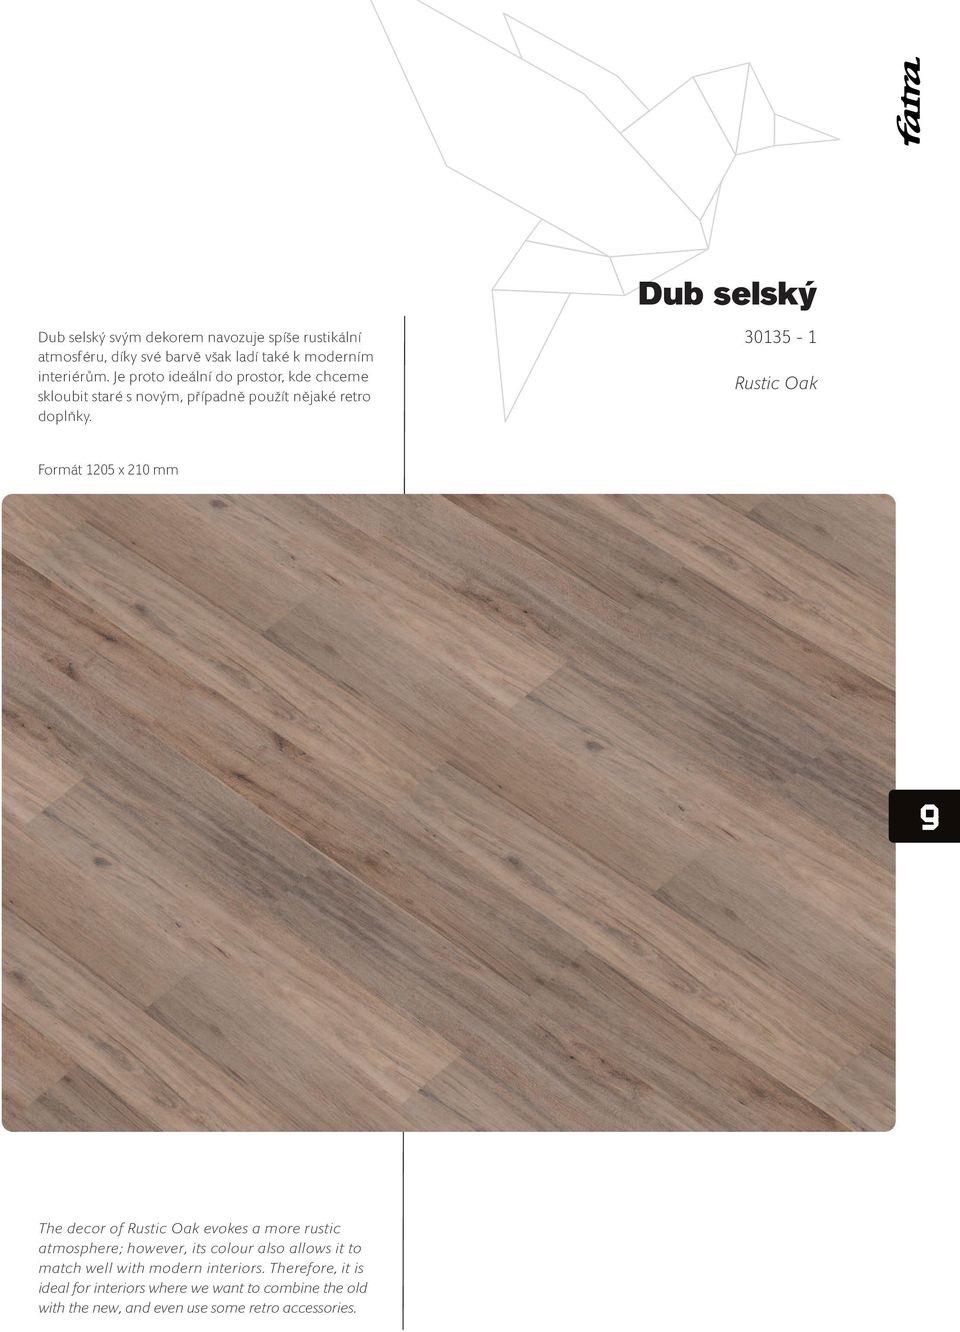 Dub selský 30135-1 Rustic Oak Formát 1205 x 210 mm The decor of Rustic Oak evokes a more rustic atmosphere; however, its colour